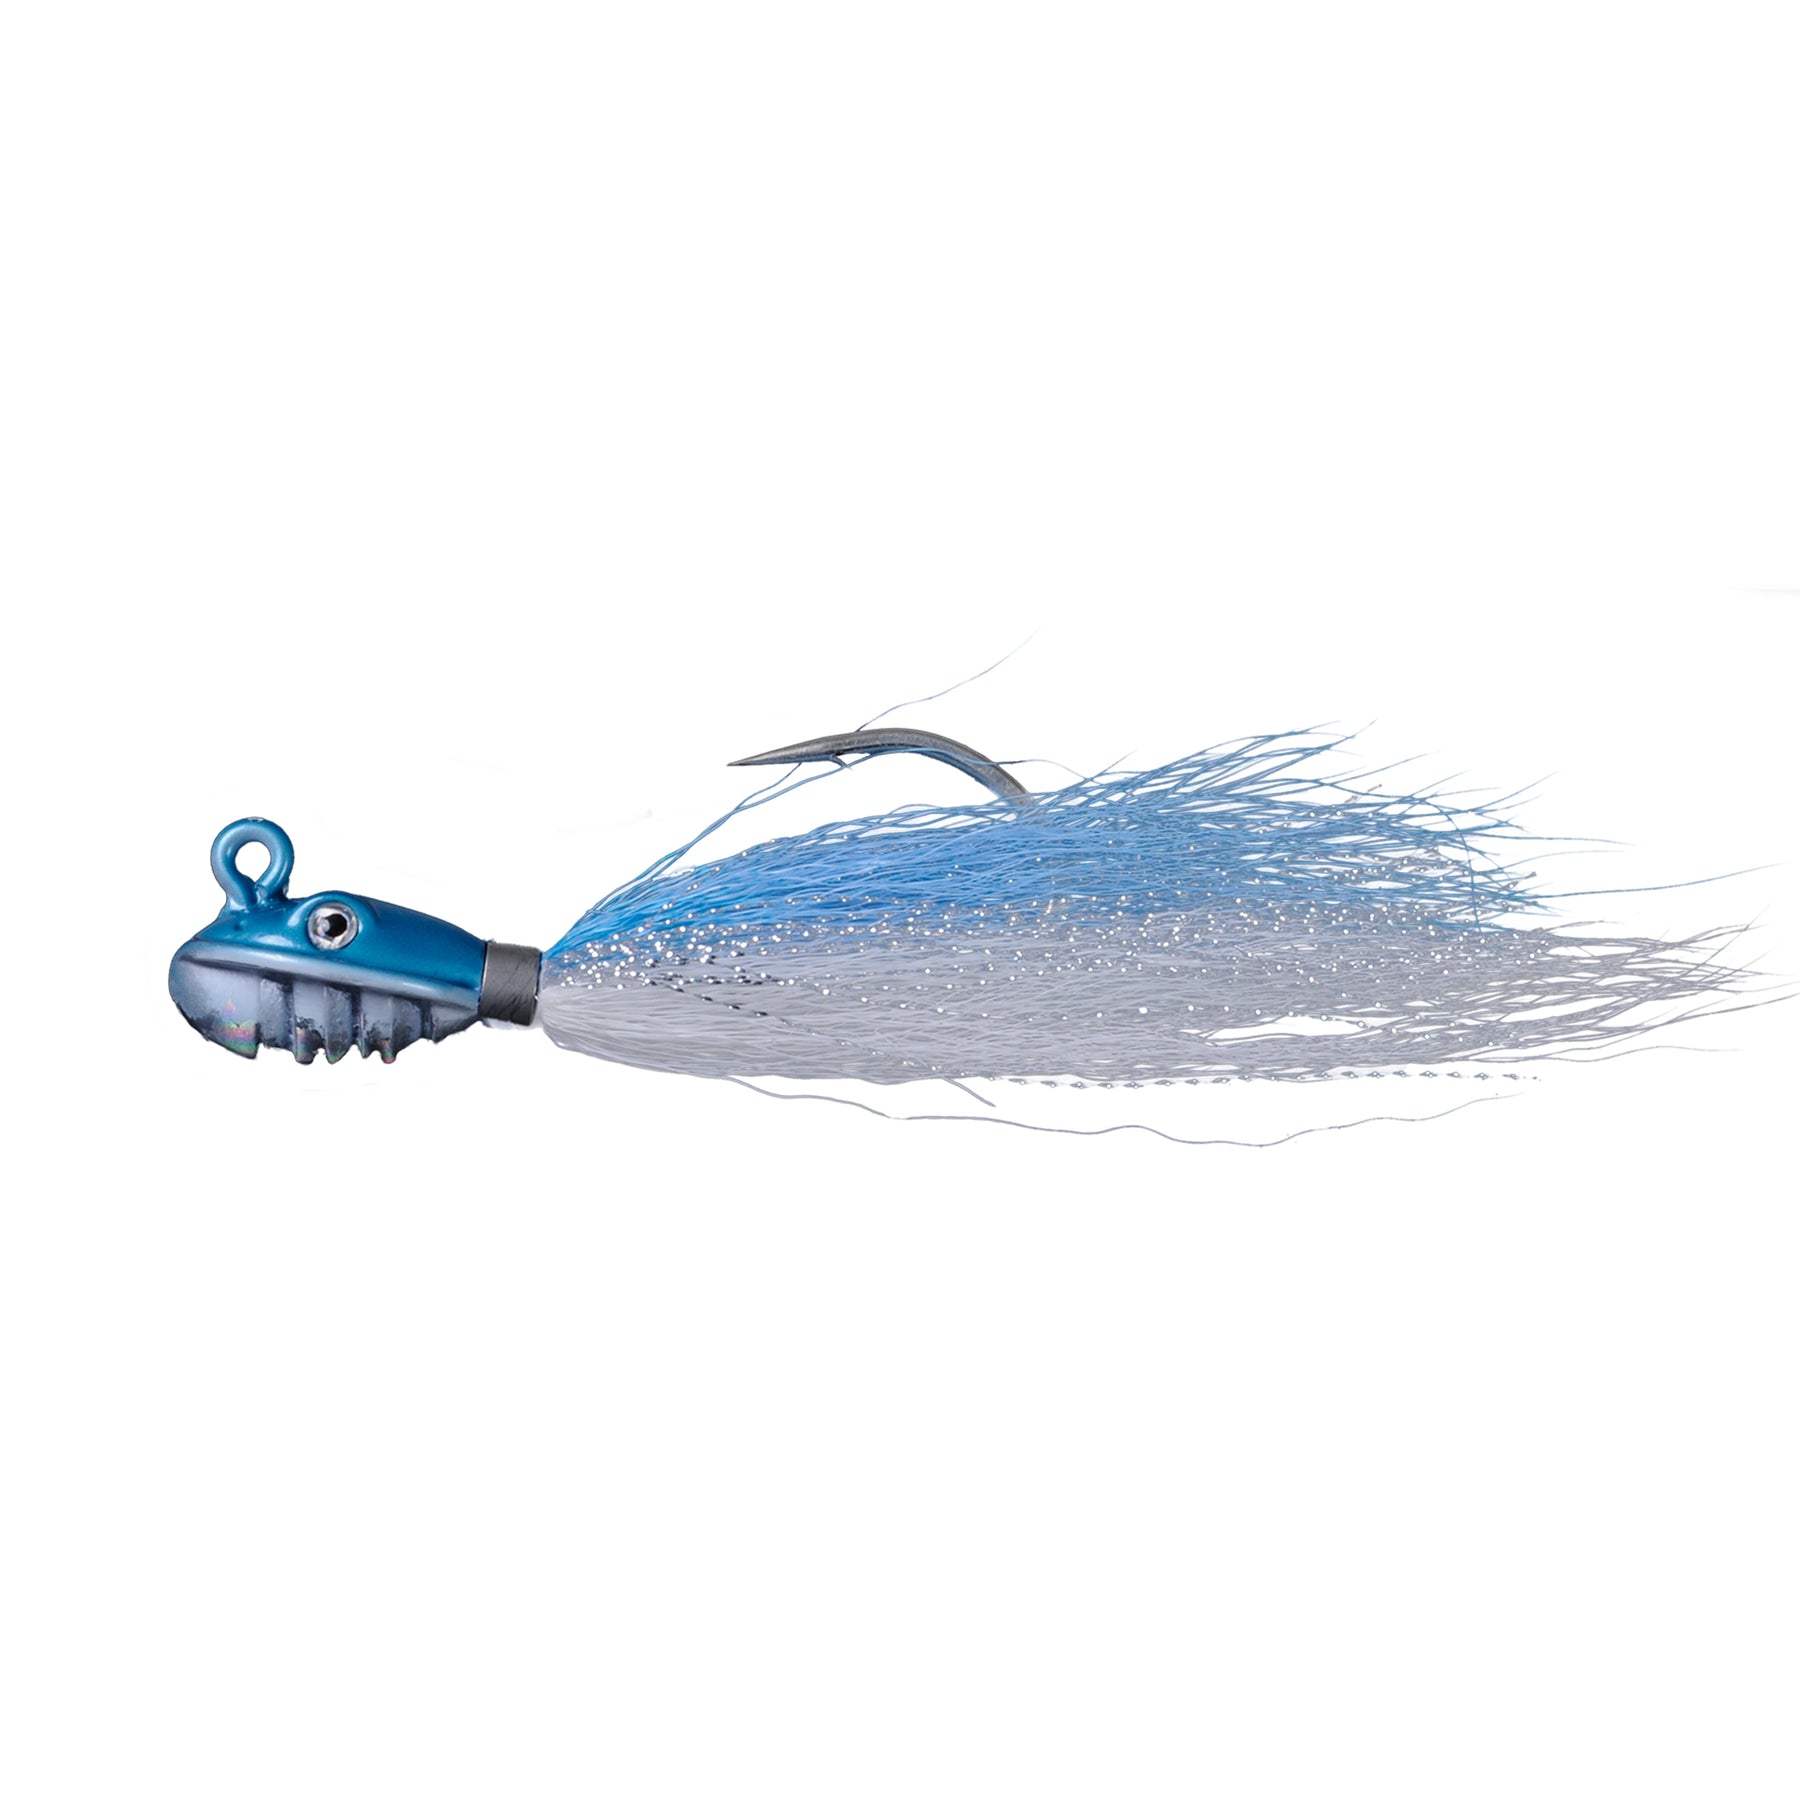 Swimming Bucktail – A Band of Anglers Inc.